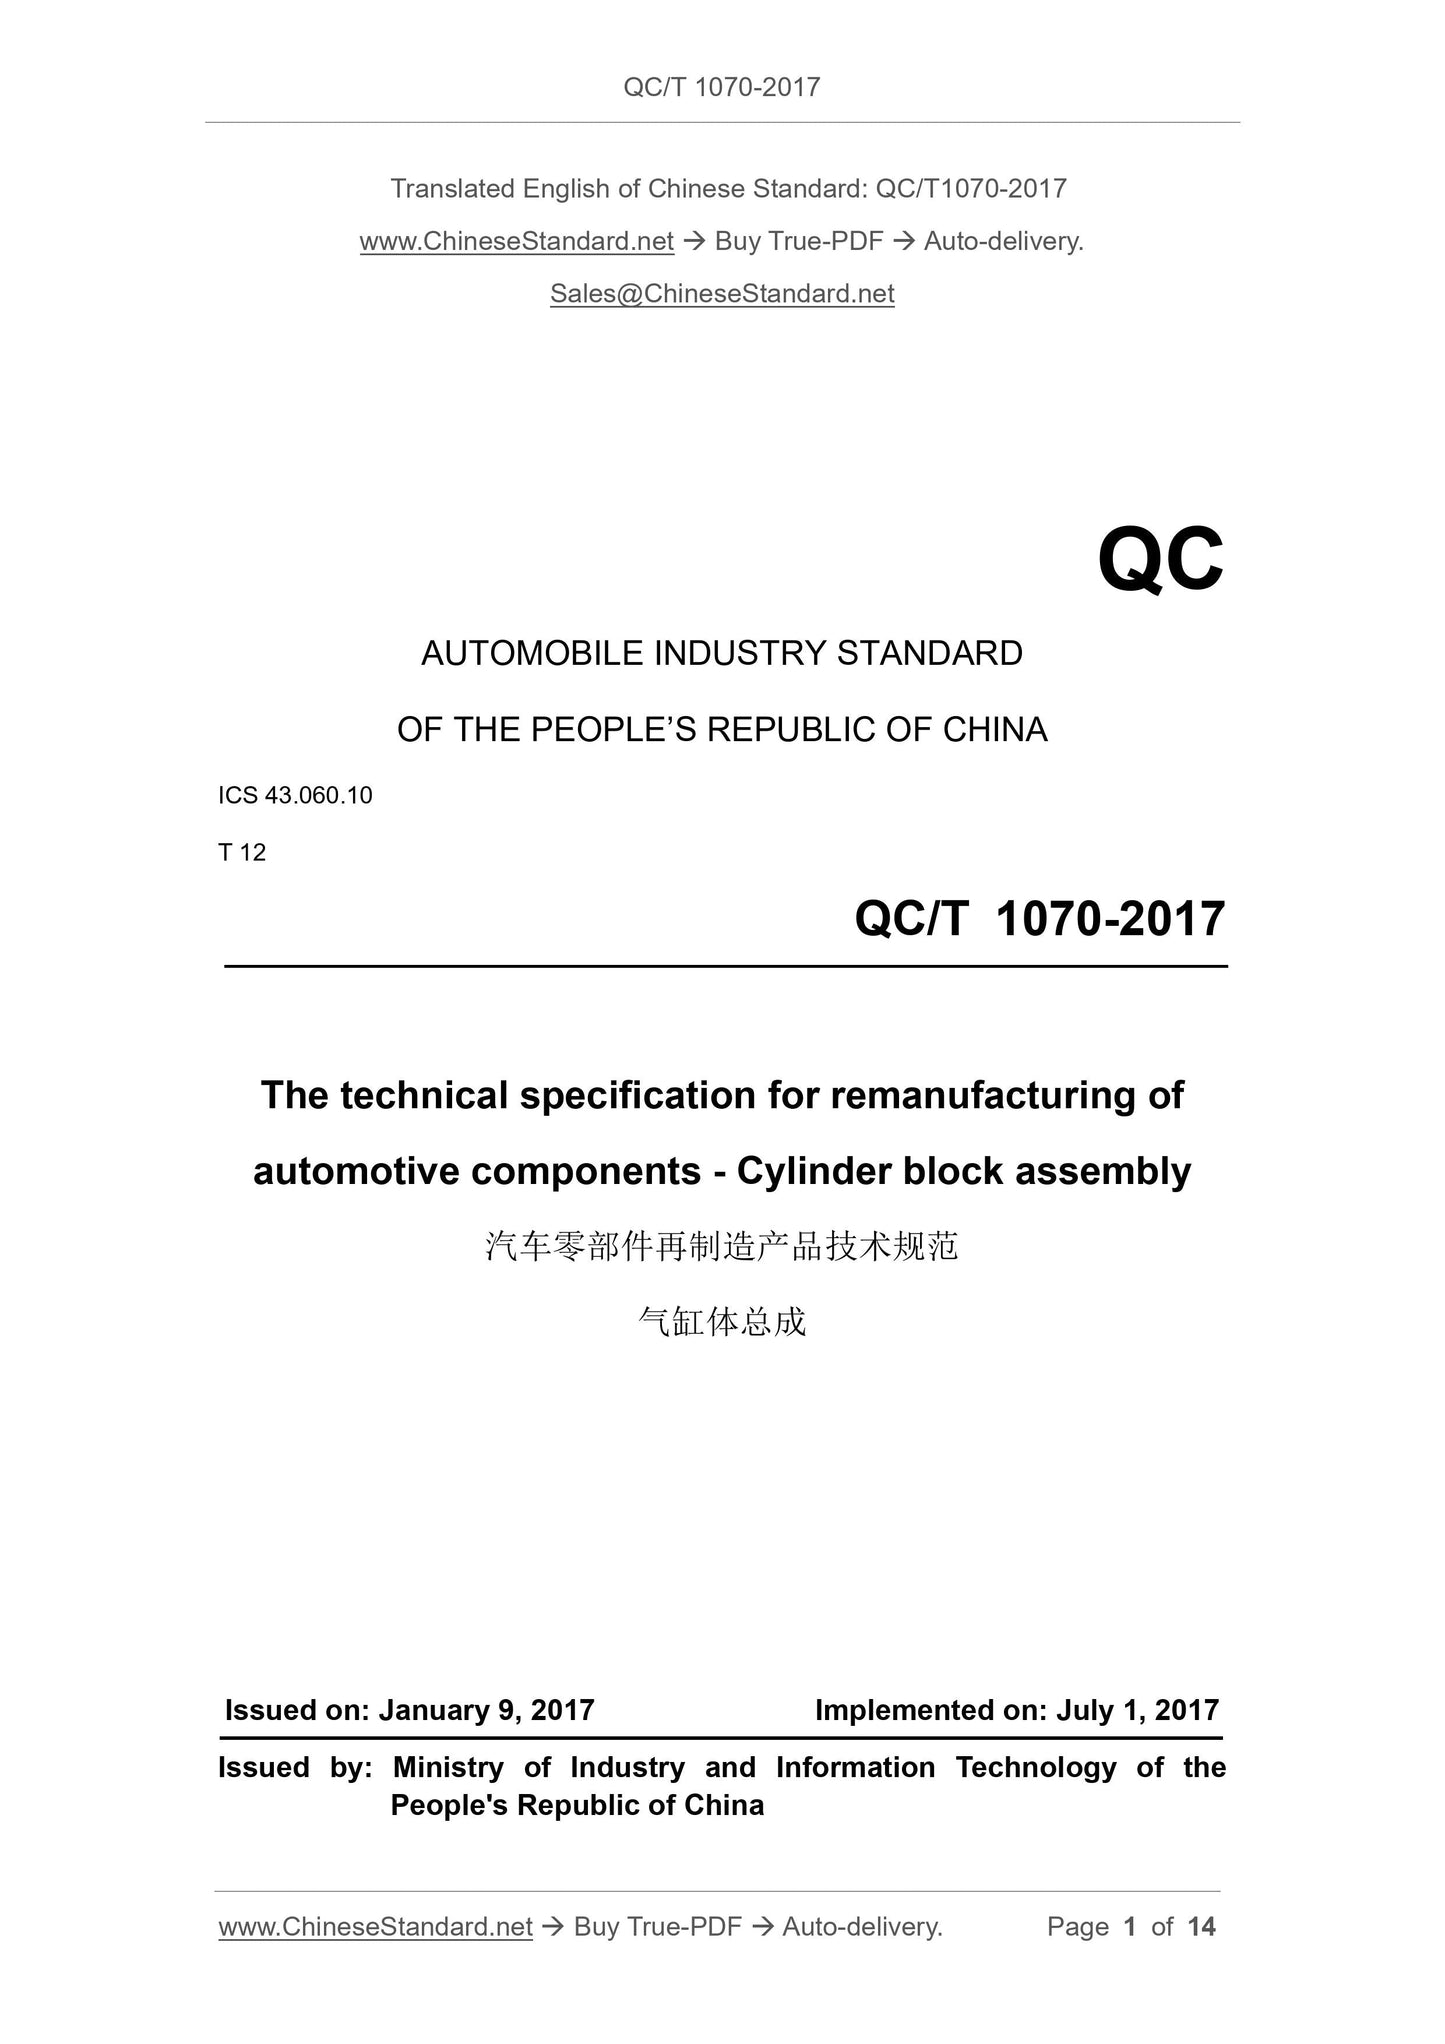 QC/T 1070-2017 Page 1